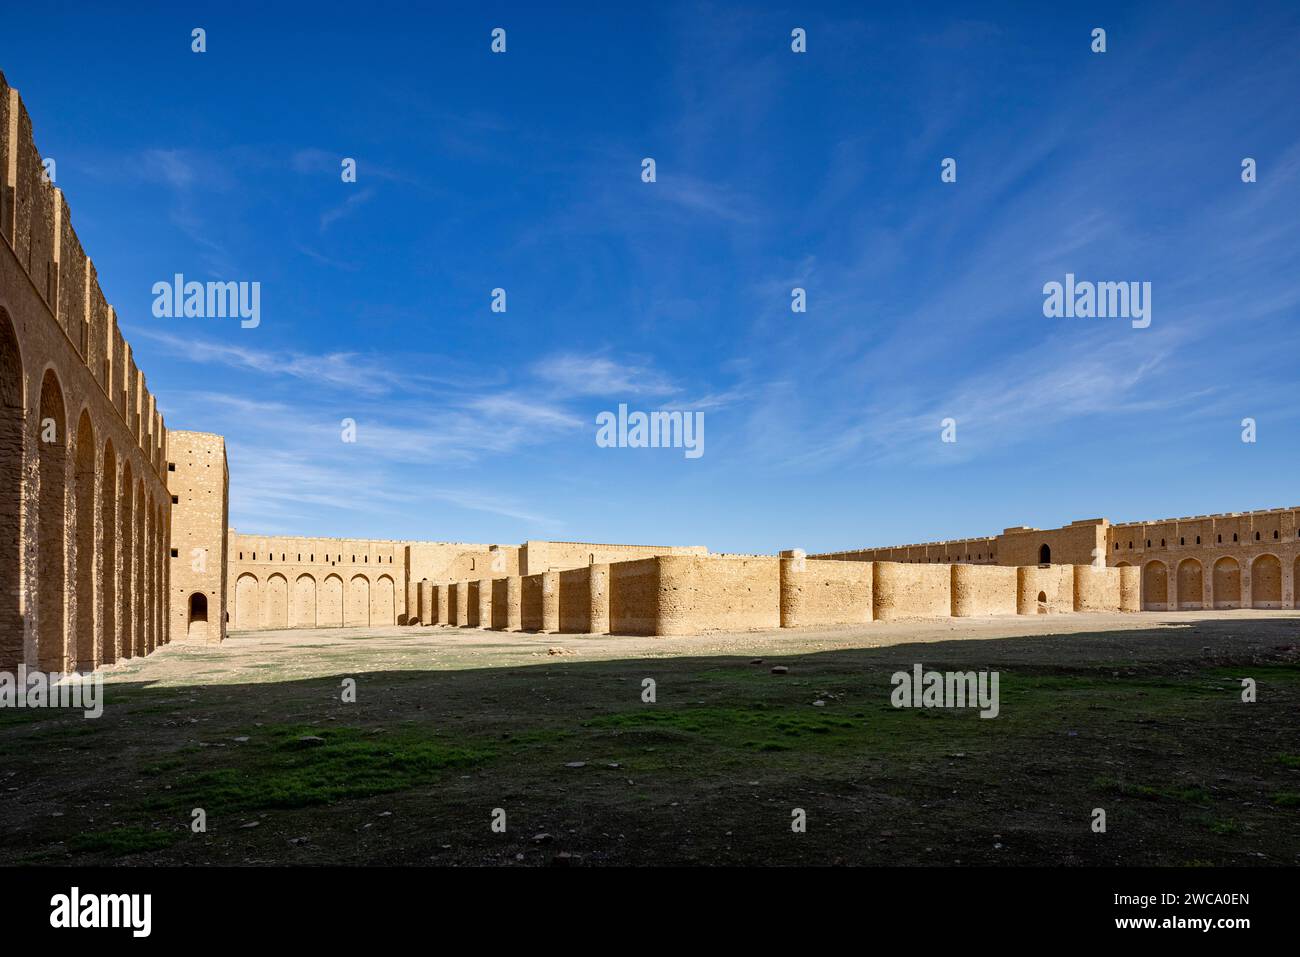 view of inner enclosure, the Fortress of al-Ukhaidir or Abbasid palace of Ukhaider, Iraq Stock Photo